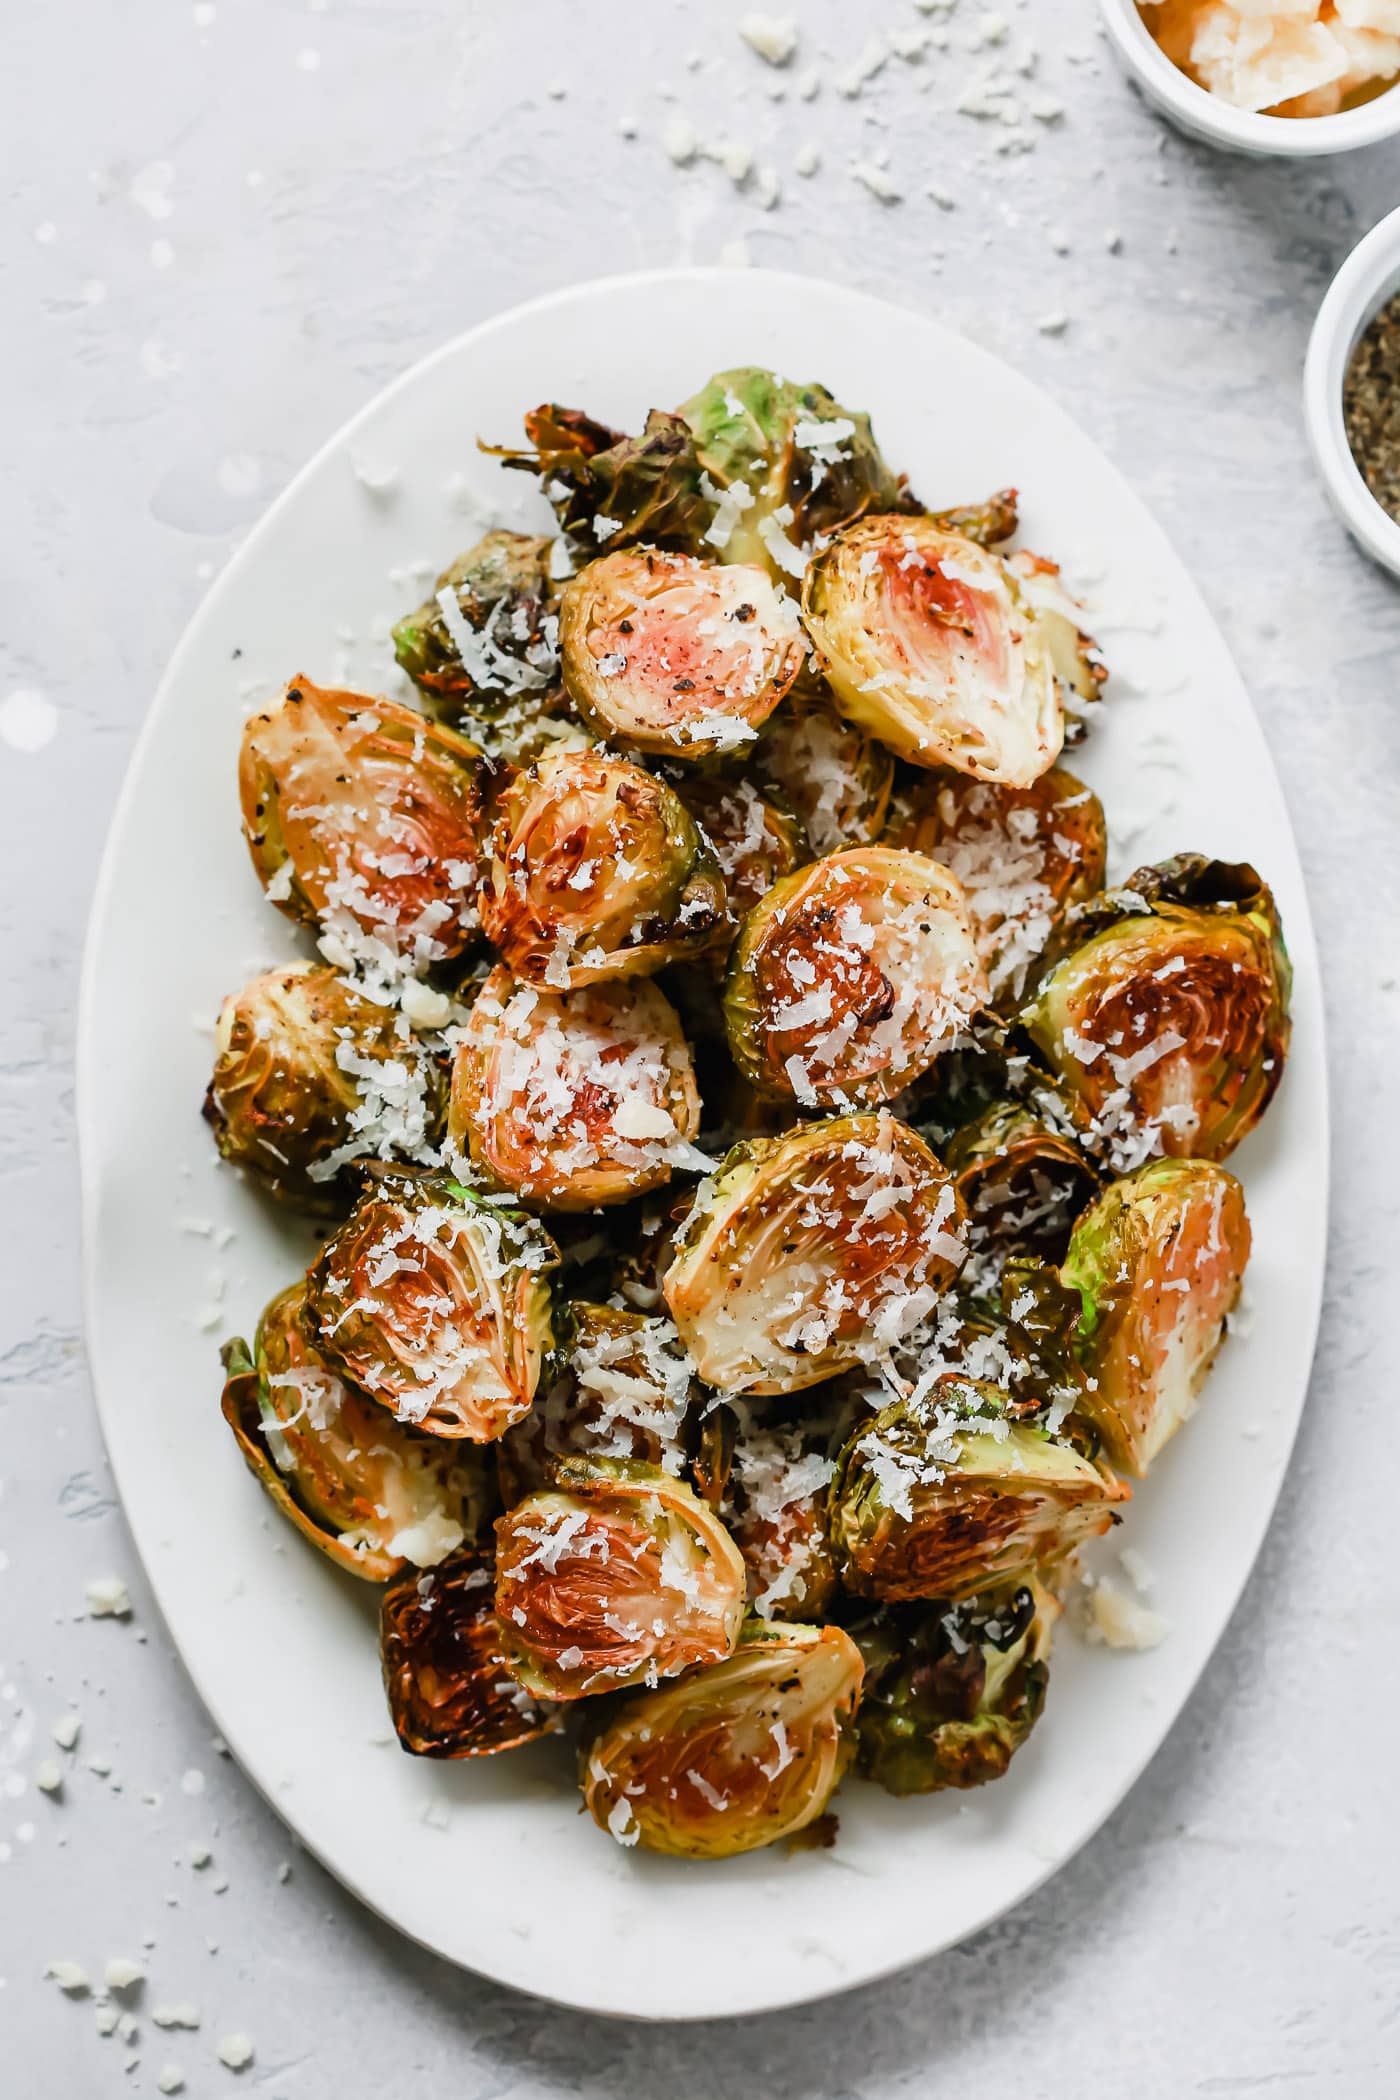 Garlic Parmesan Brussels Sprouts from Primavera Kitchen on foodiecrush.com